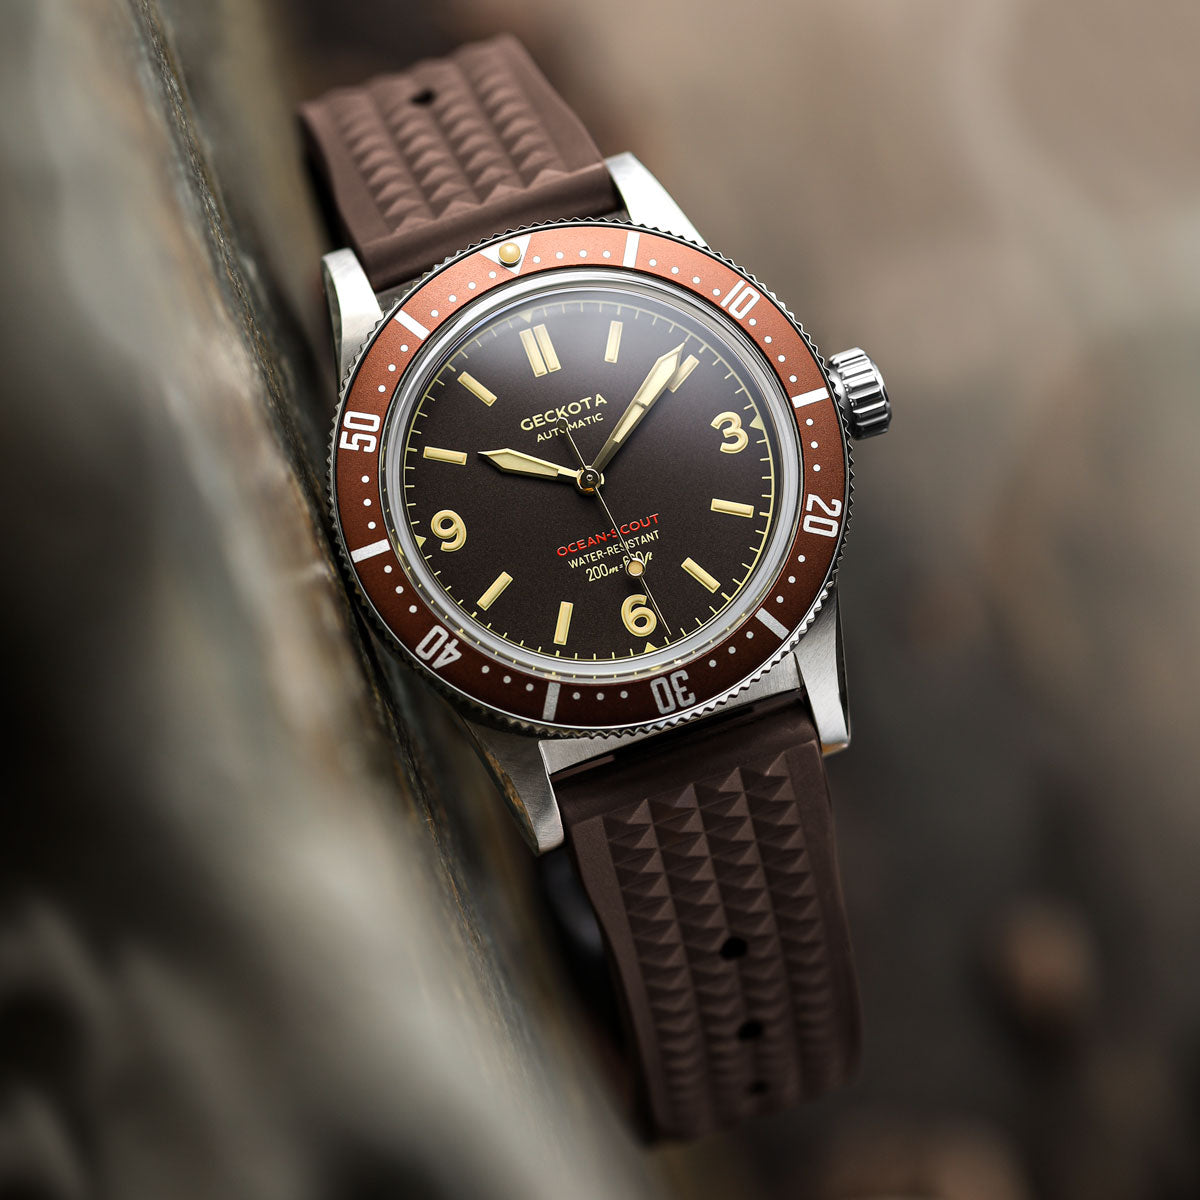 Seacroft Waffle FKM Rubber Dive Watch Strap - Brown - additional image 1